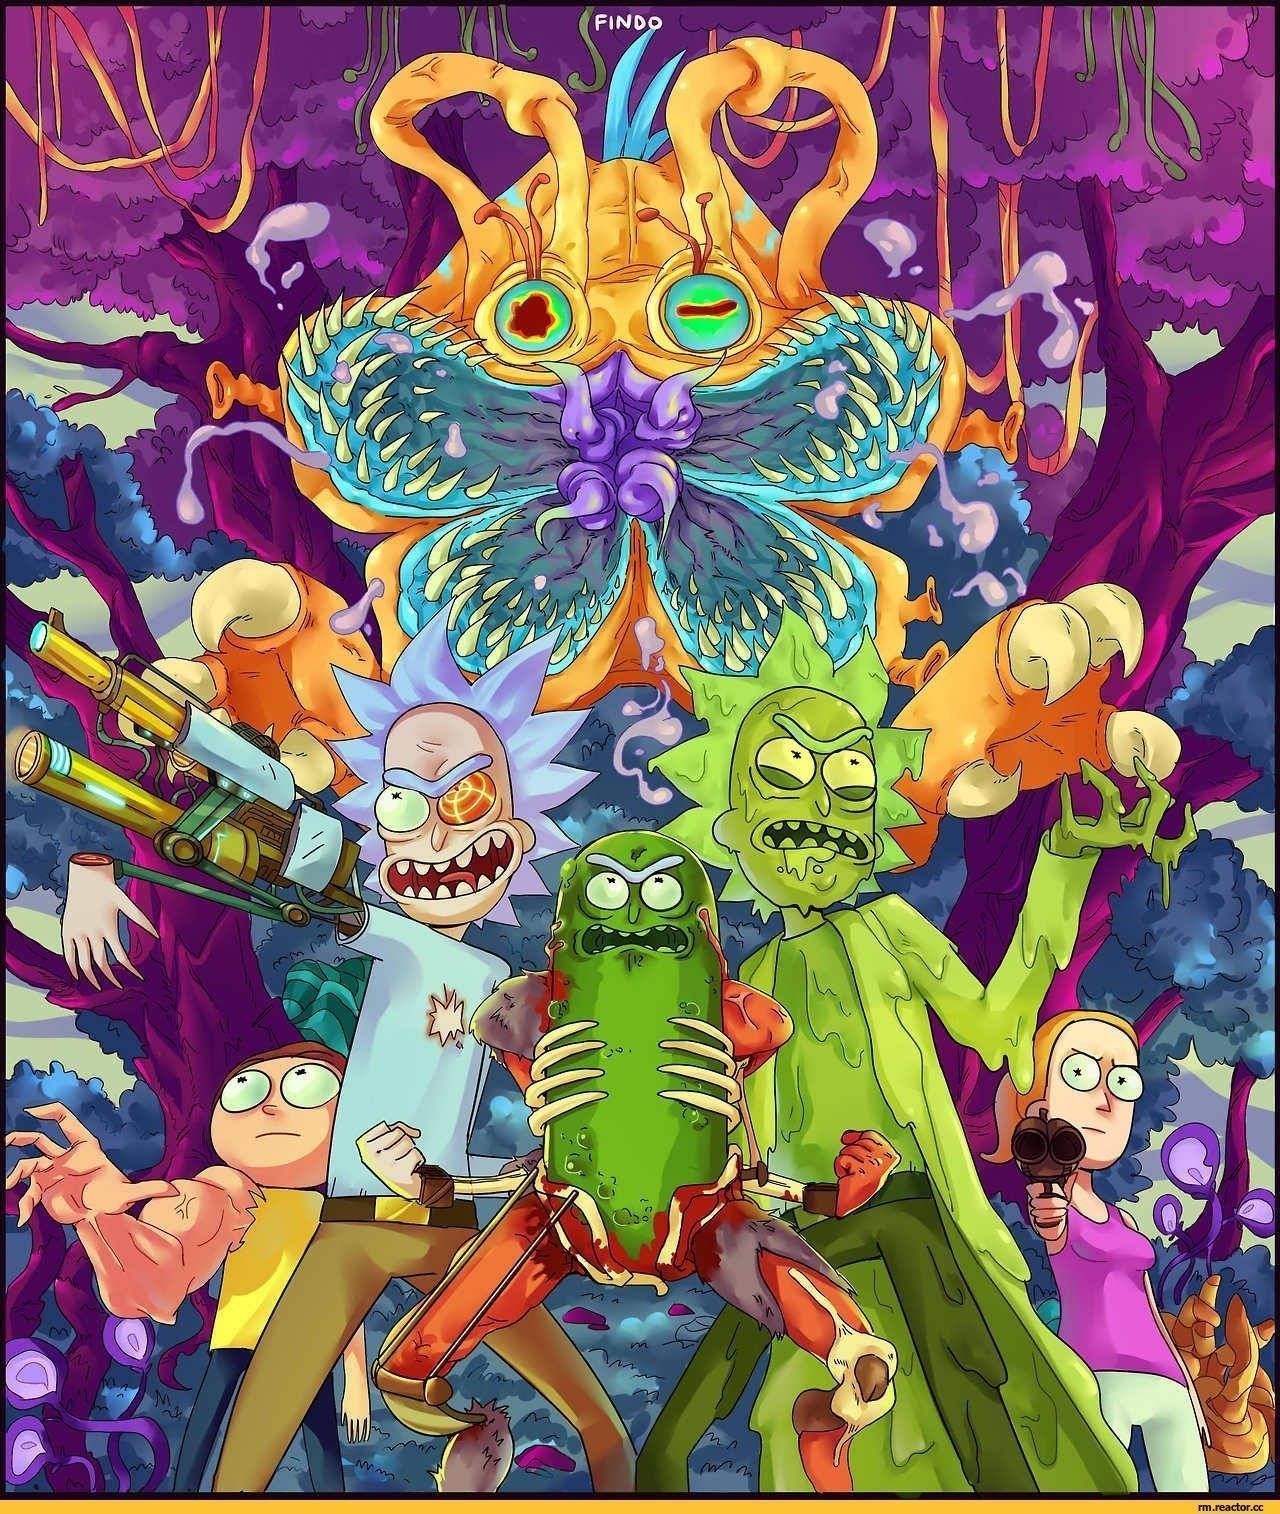 Free Rick And Morty Trippy Wallpaper Downloads, Rick And Morty Trippy Wallpaper for FREE